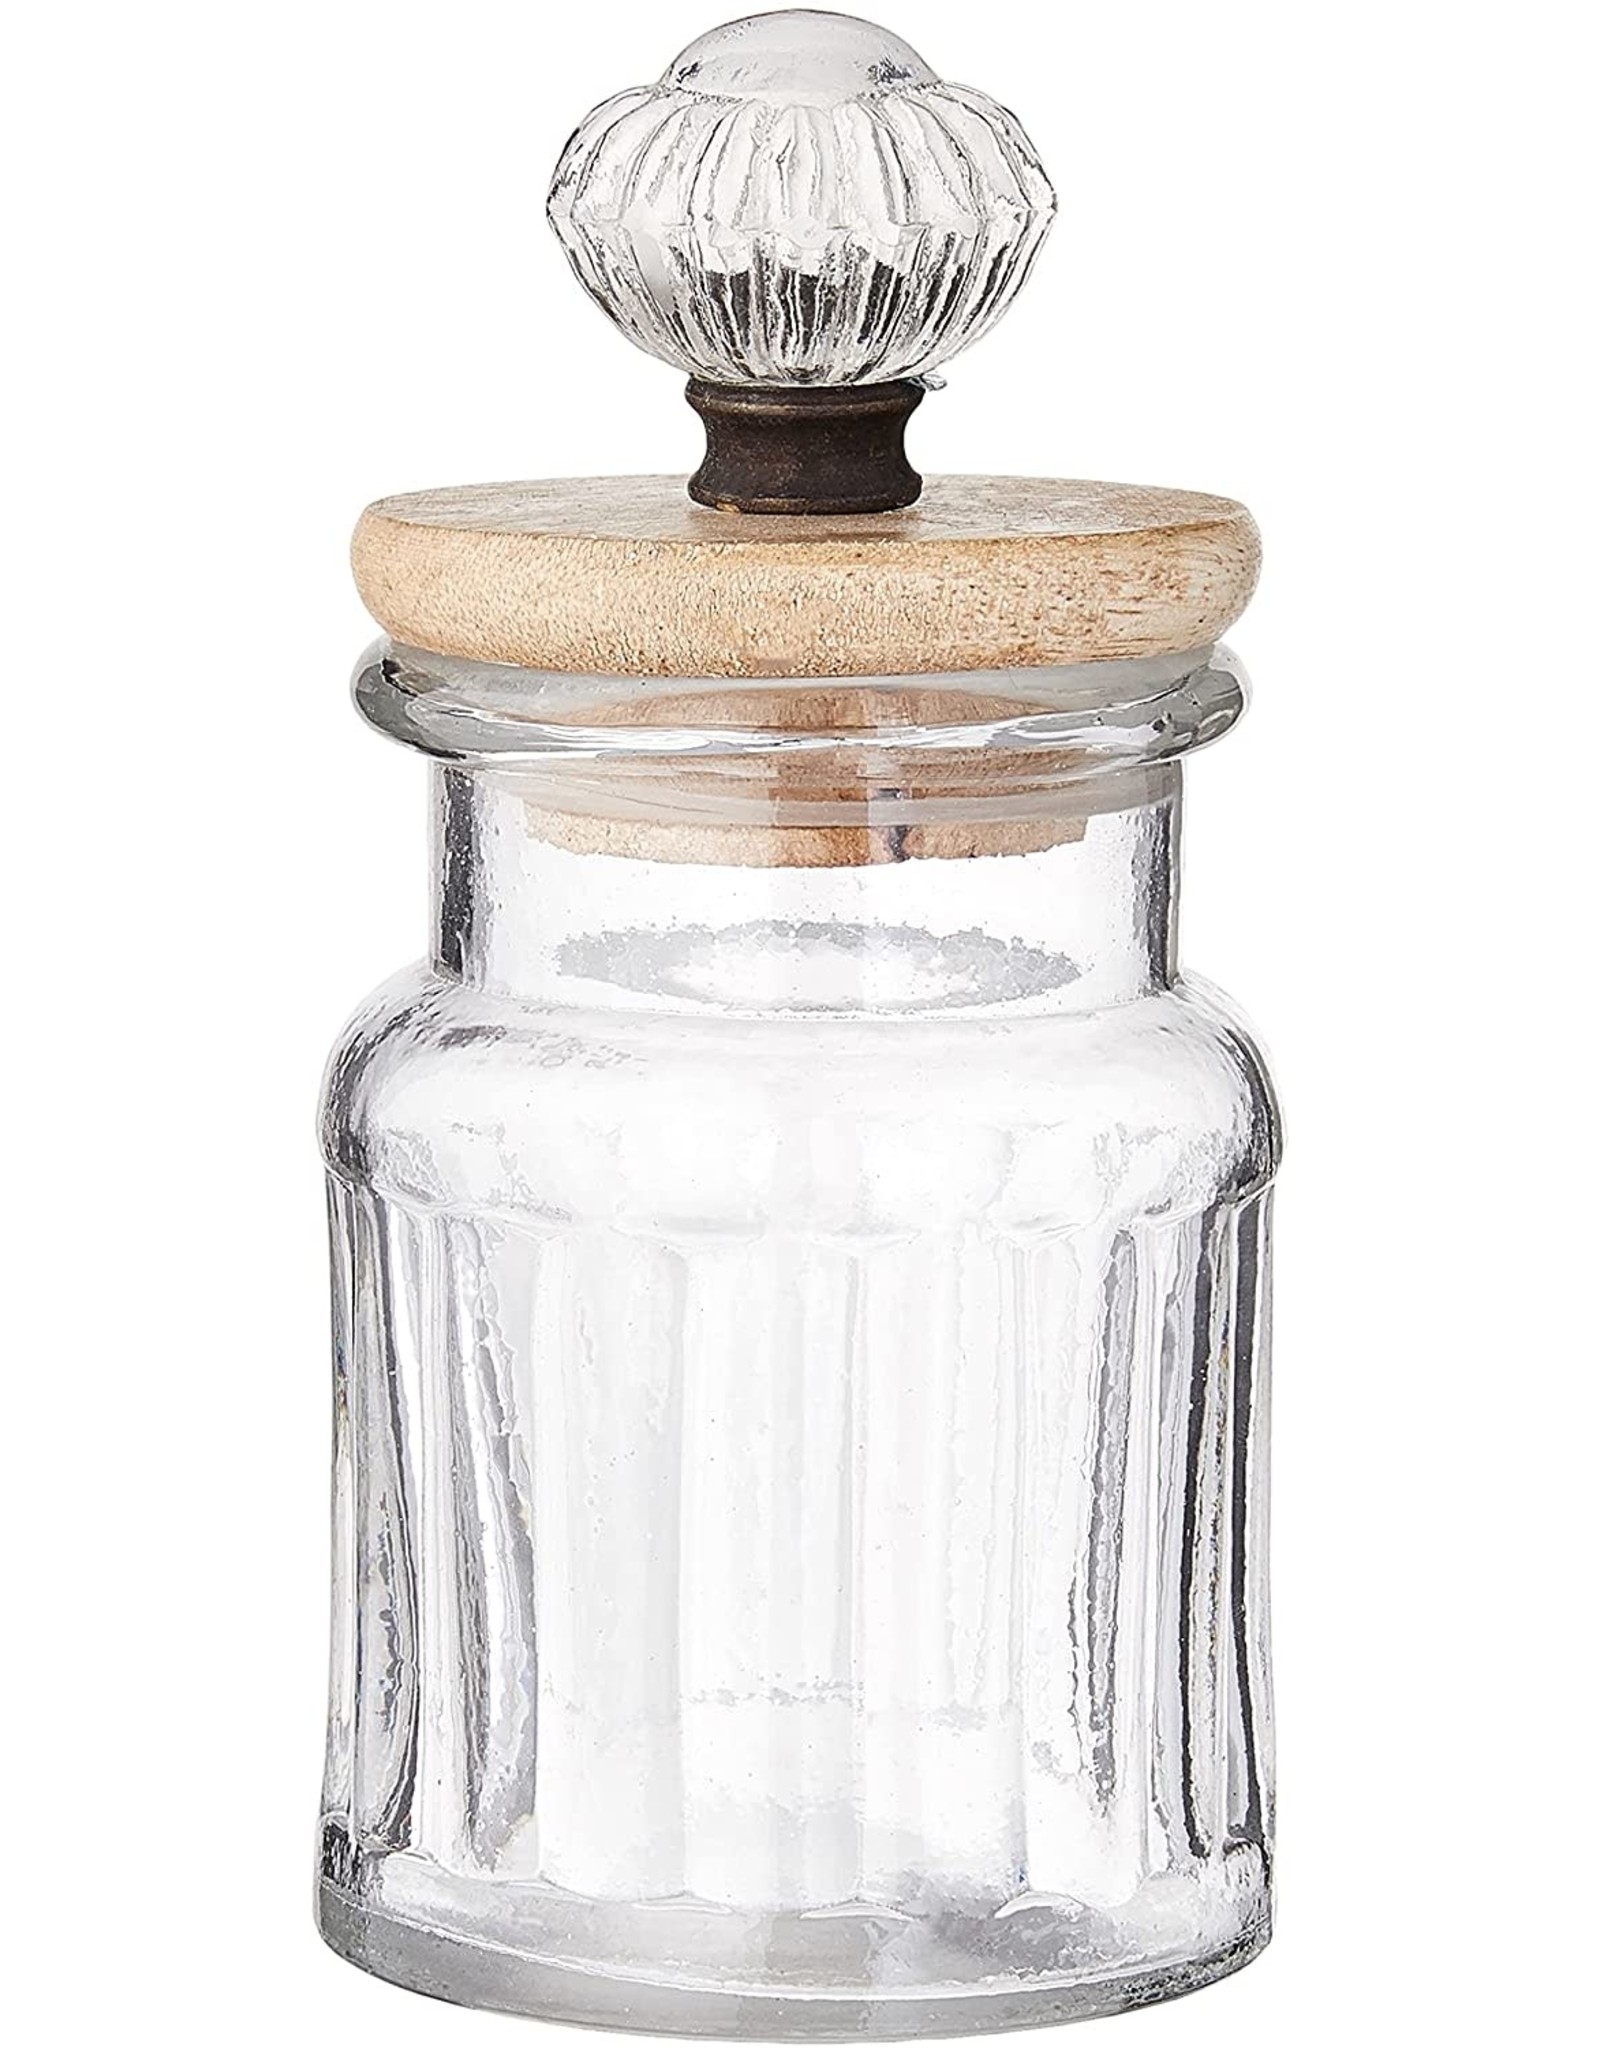 Mud Pie Door Knob Glass Condiment Canisters W Wooden Lids and Tray